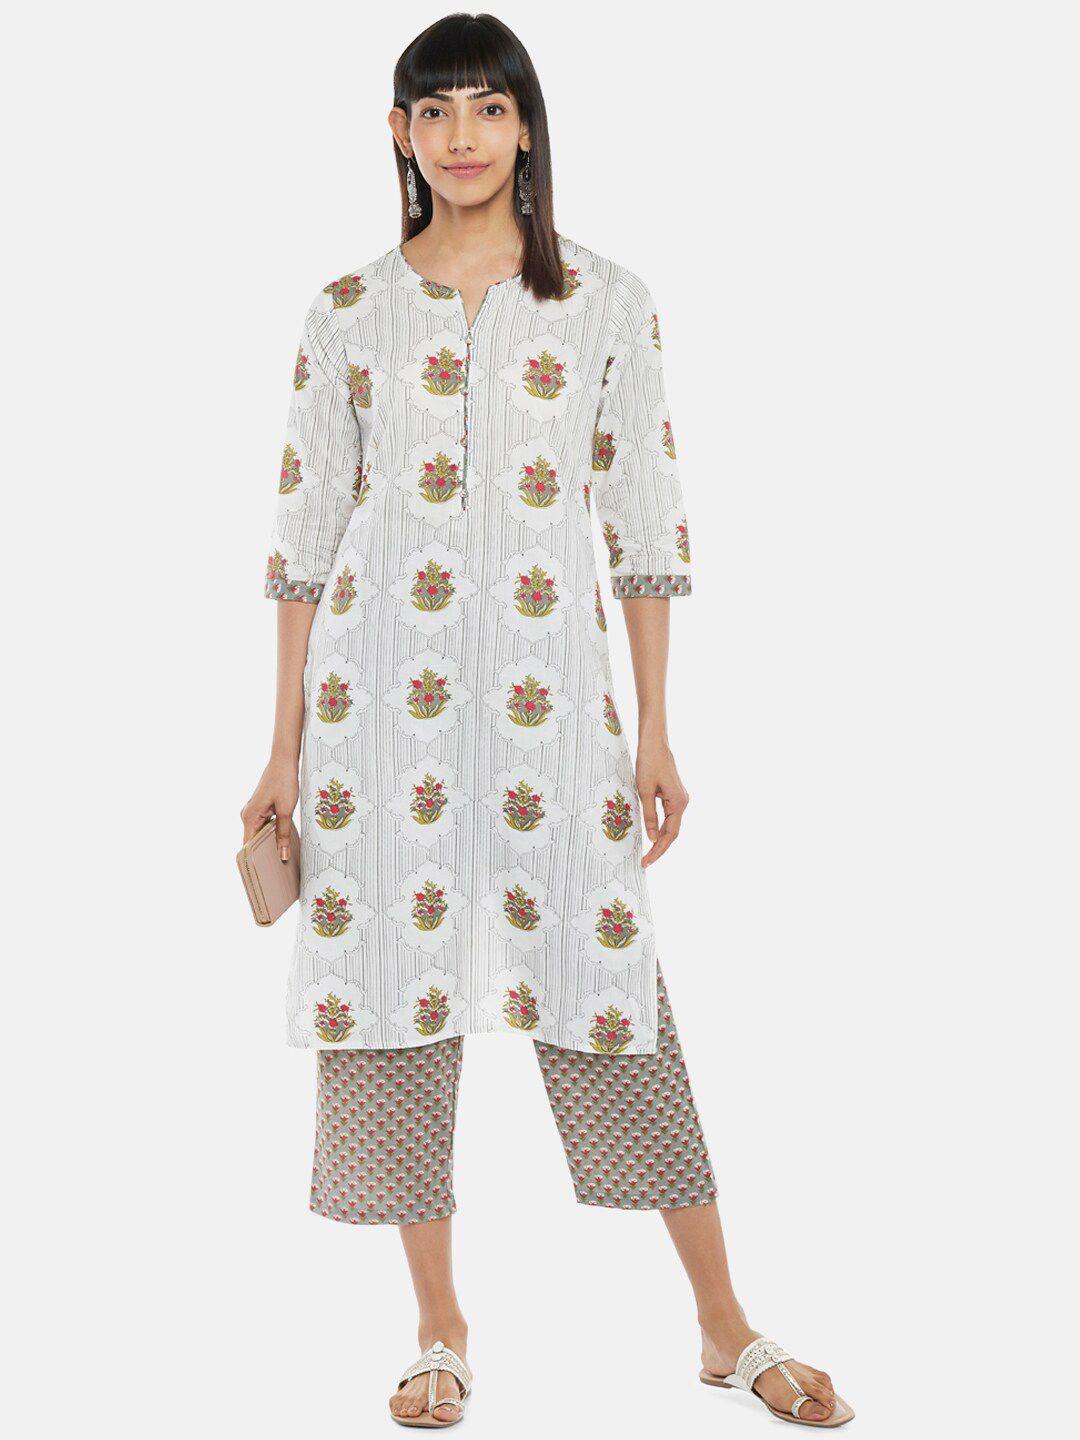 rangmanch by pantaloons women silver-toned ethnic motifs printed pure cotton kurta with trousers